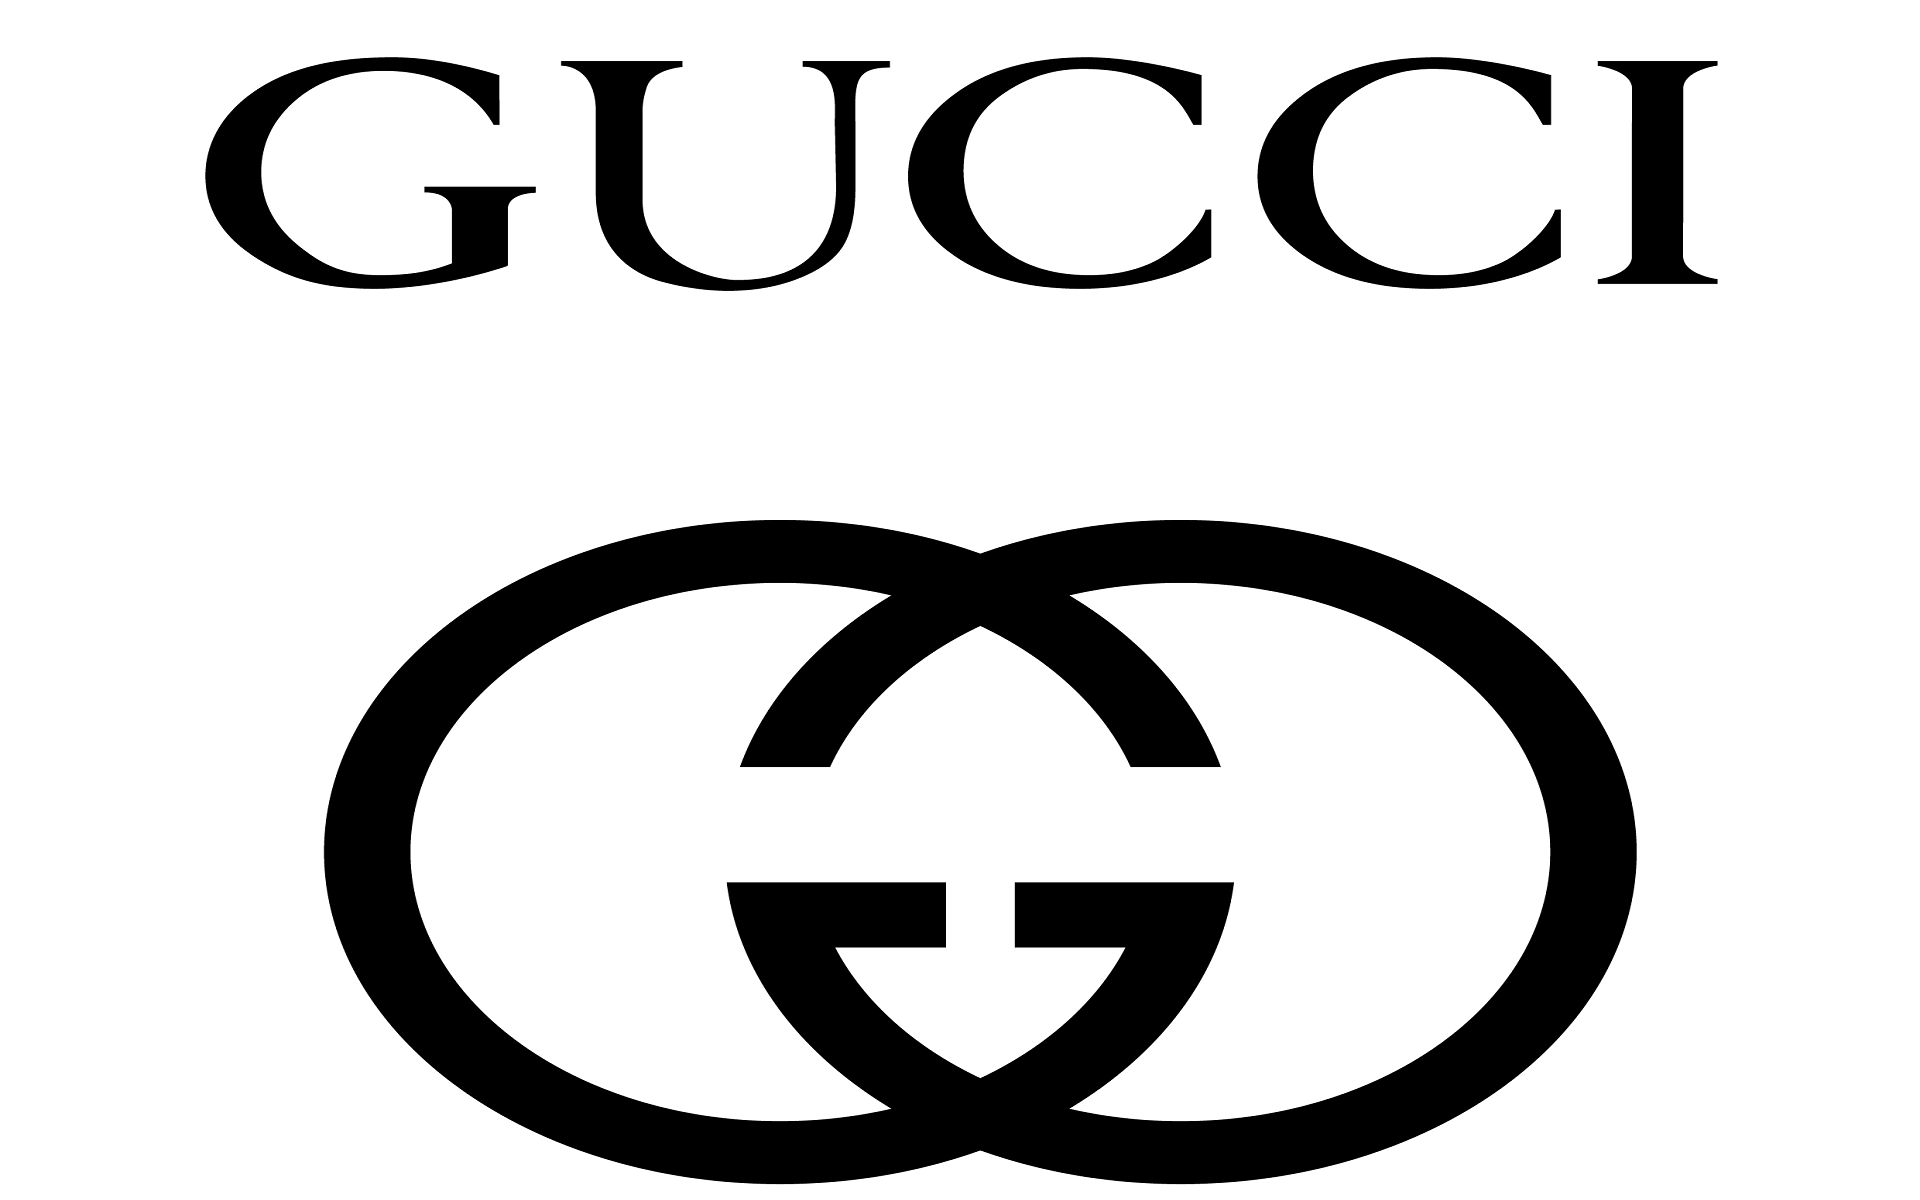 Gucci Logo Wallpapers - Top 23 Best Gucci Logo Wallpapers [ HQ ]